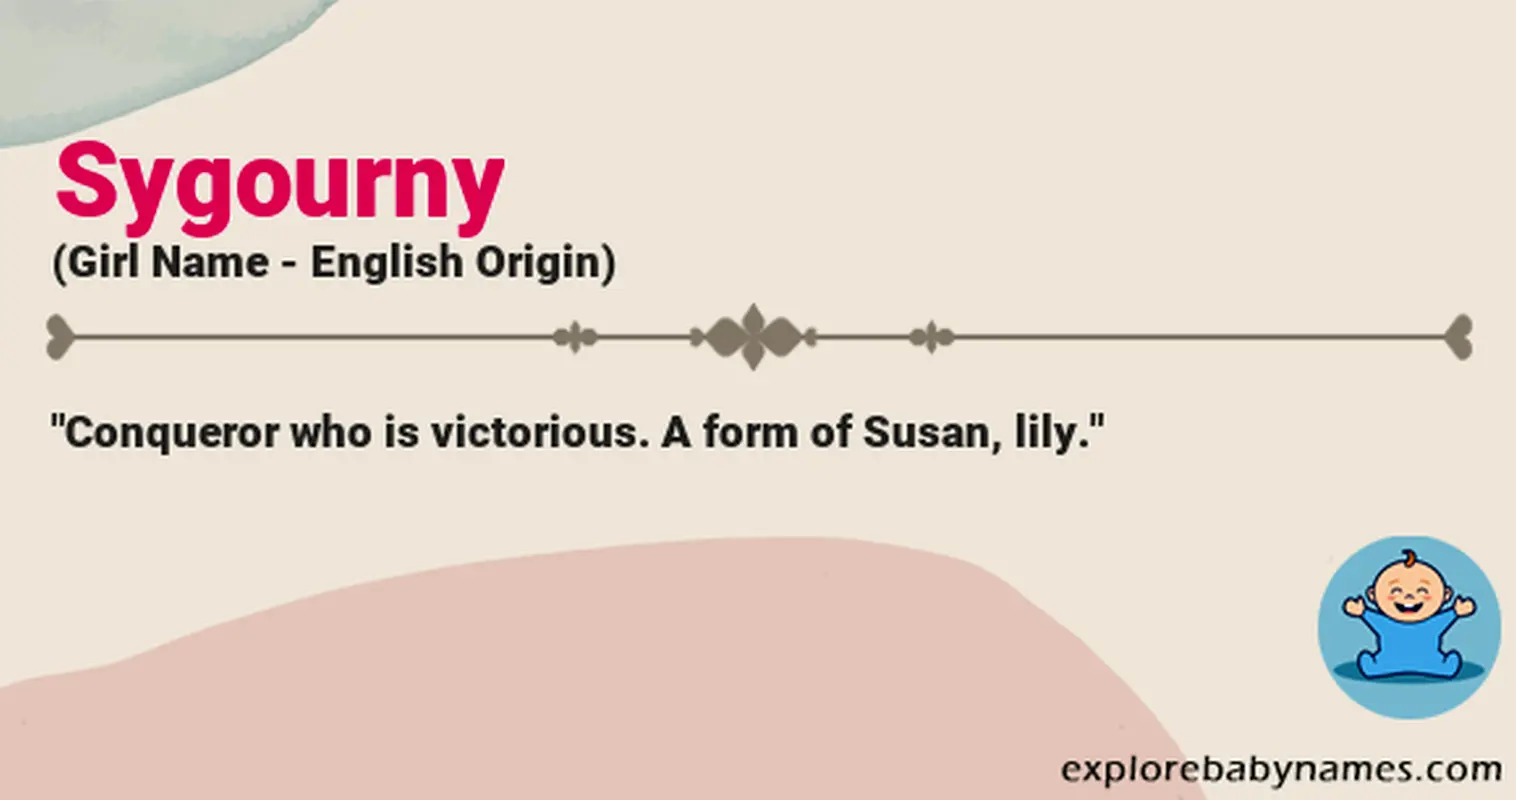 Meaning of Sygourny